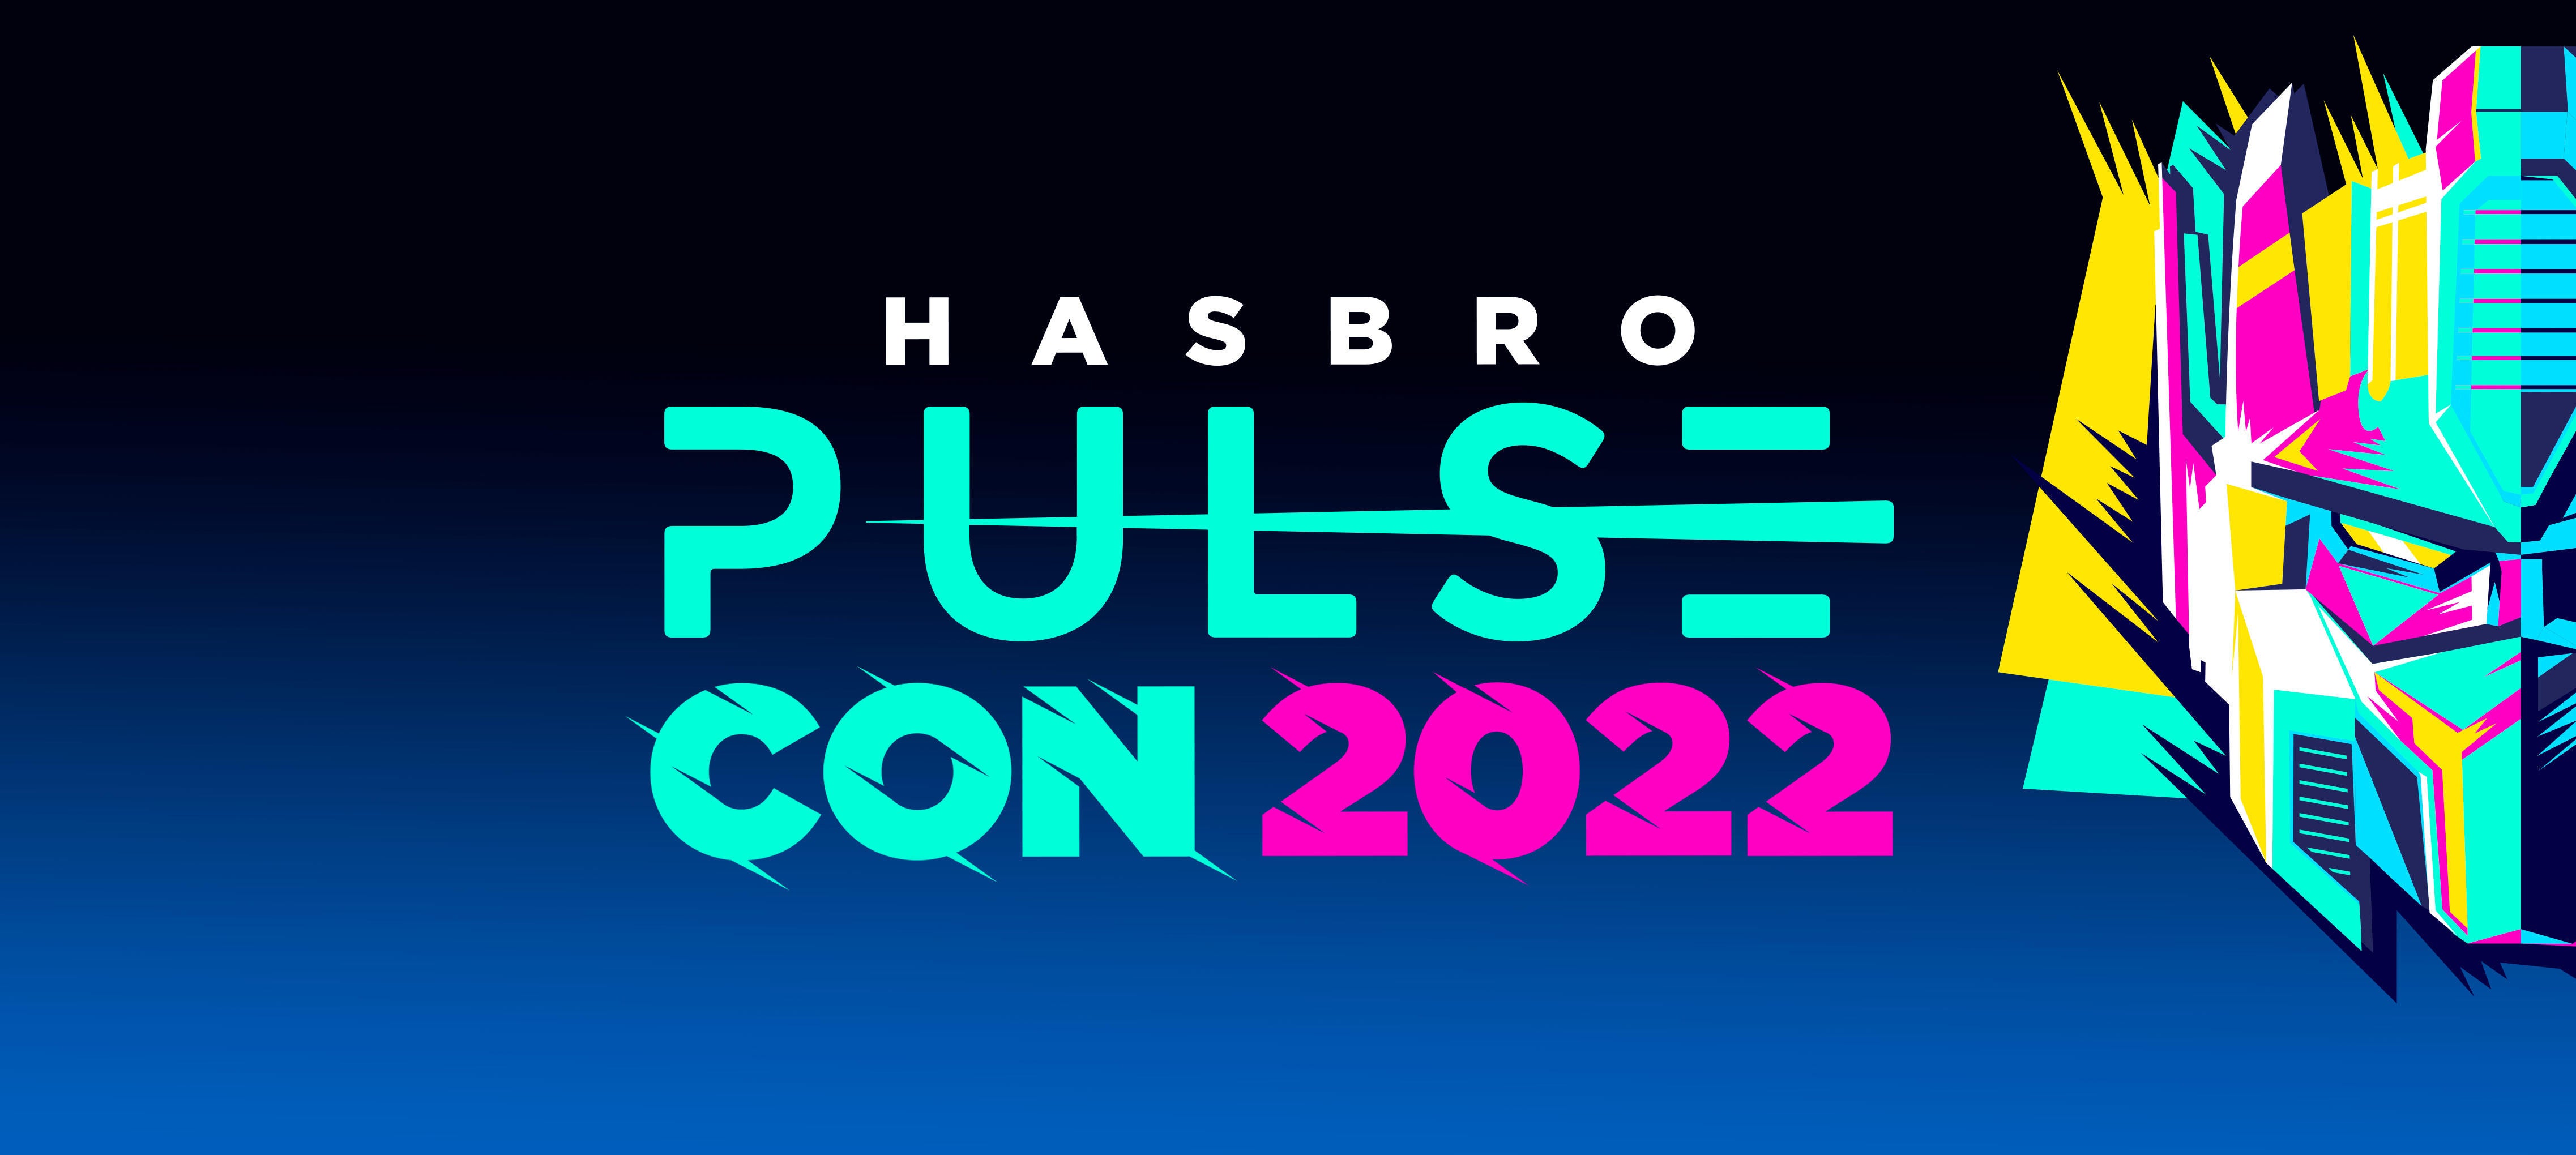 Here’s Where to Get Hasbro Pulse Con 2022 Exclusives